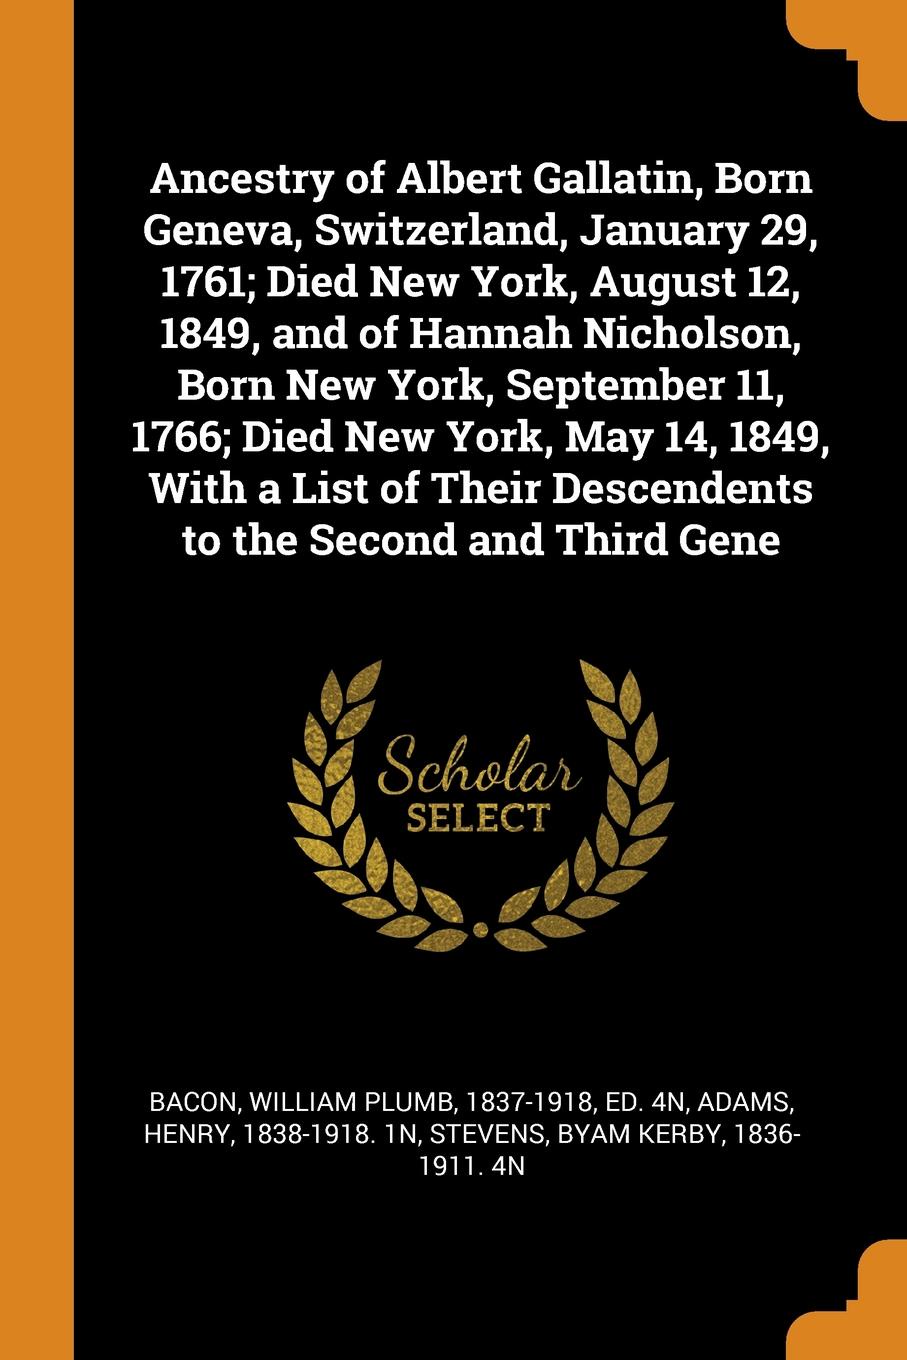 Ancestry of Albert Gallatin, Born Geneva, Switzerland, January 29, 1761; Died New York, August 12, 1849, and of Hannah Nicholson, Born New York, September 11, 1766; Died New York, May 14, 1849, With a List of Their Descendents to the Second and Th...